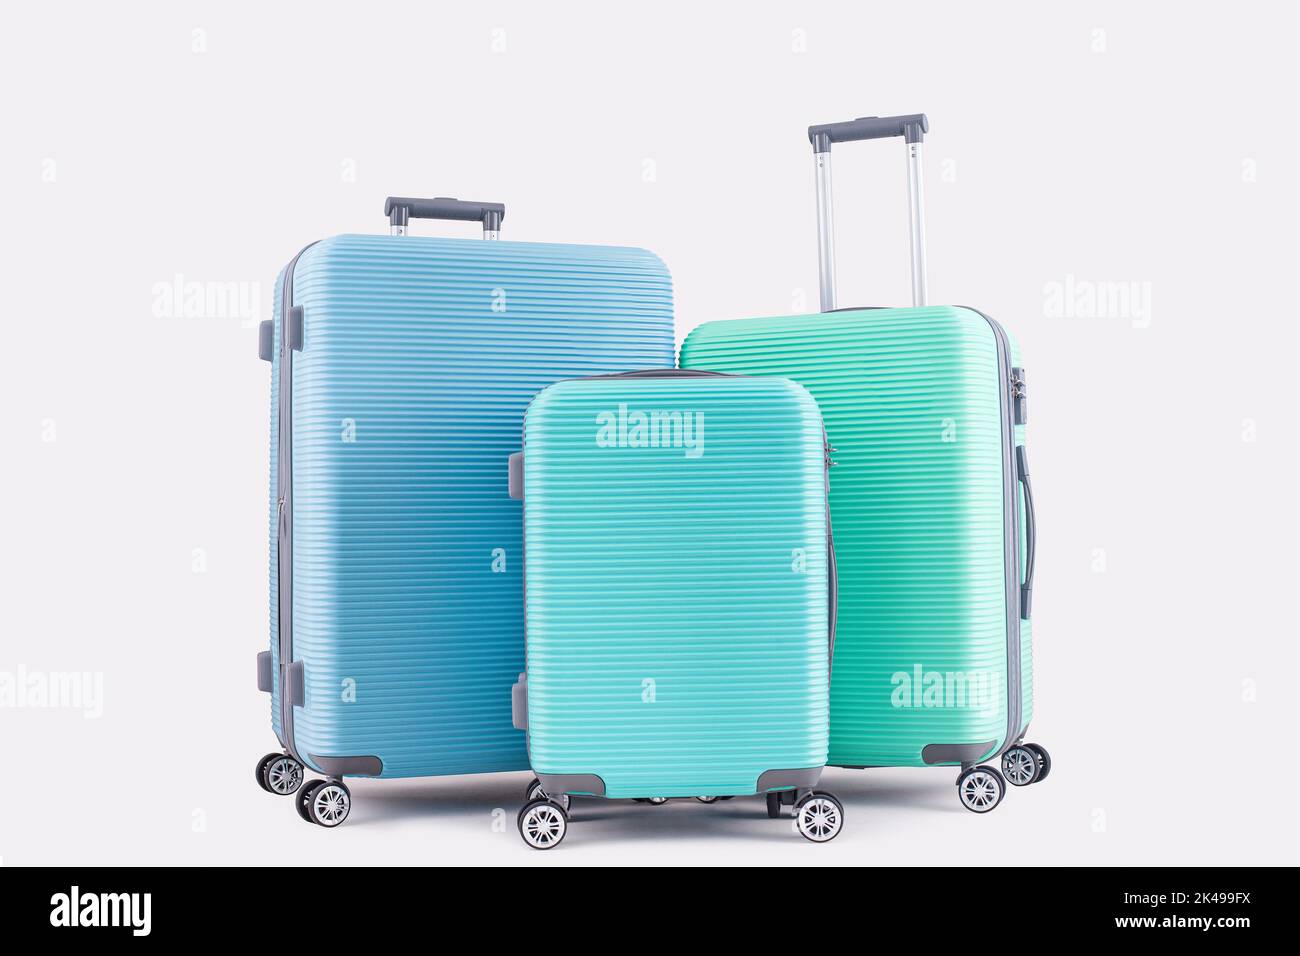 Blue Mint Green suitcase isolated on pastel background vacation luggage Stock Photo